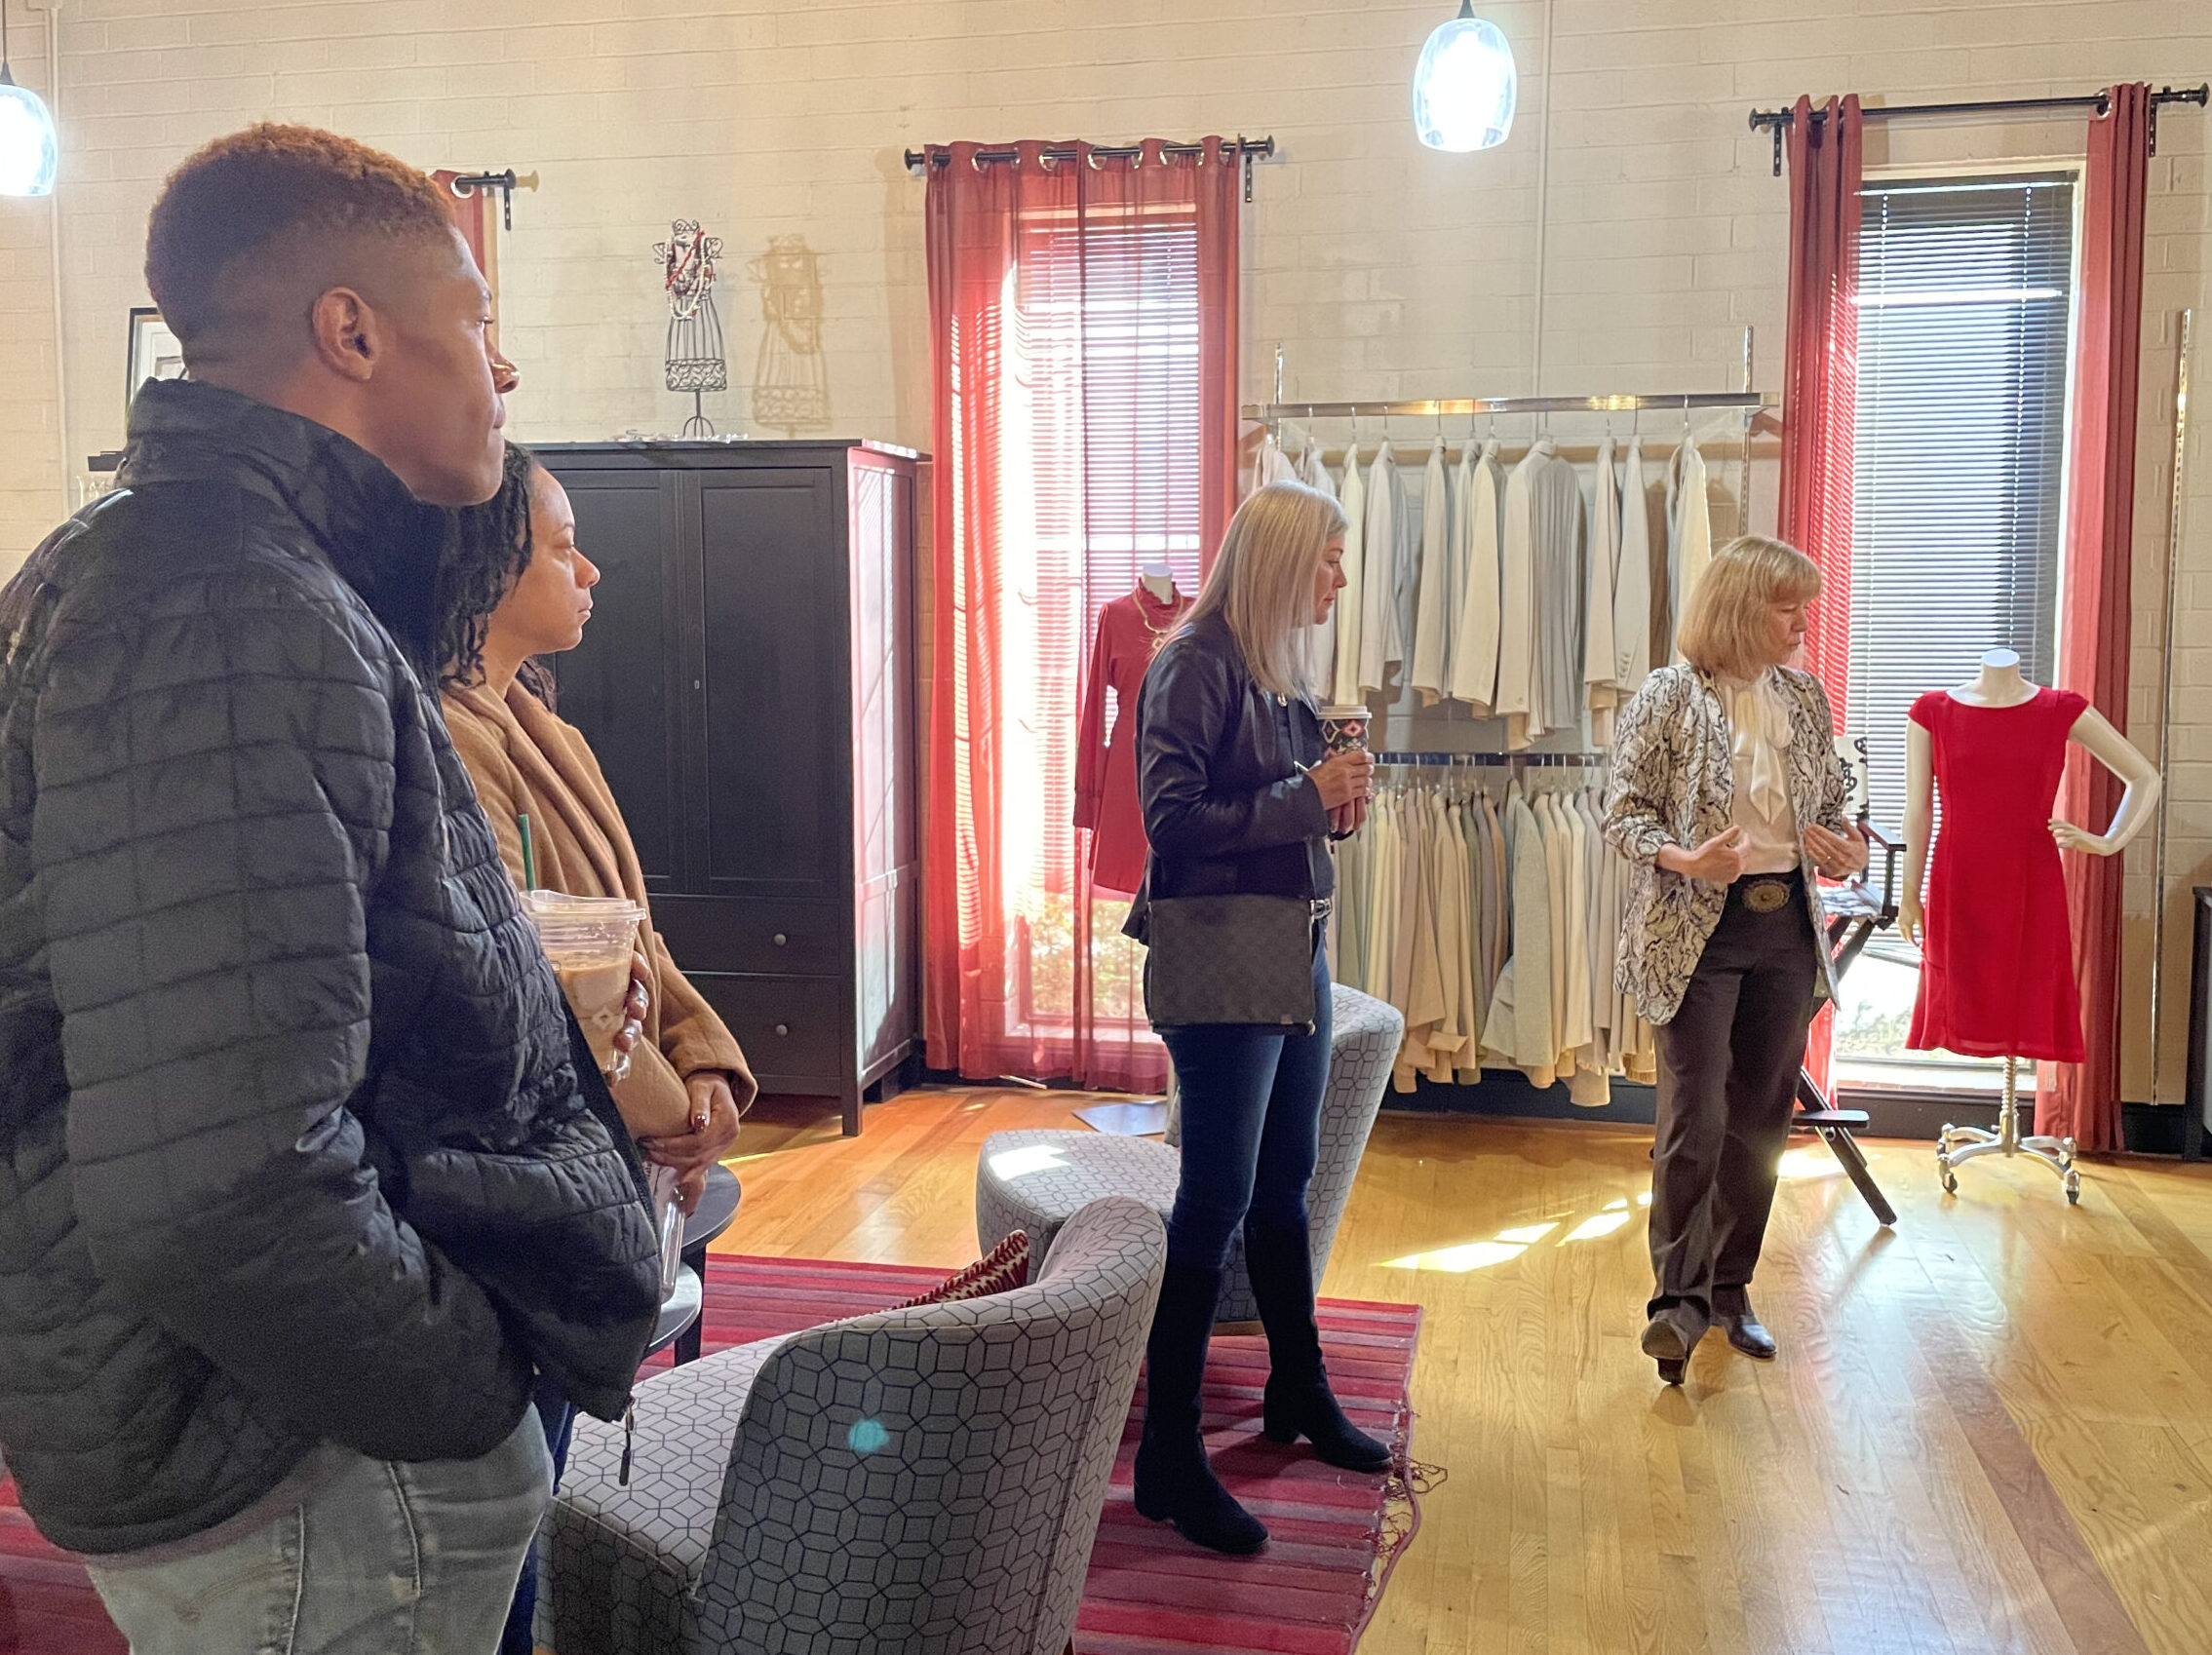 Kerry Barr O'Connor, former Executive Director of Dress for Success, providing a tour of the area where women try on clothing in preparation of the next step of their journey.